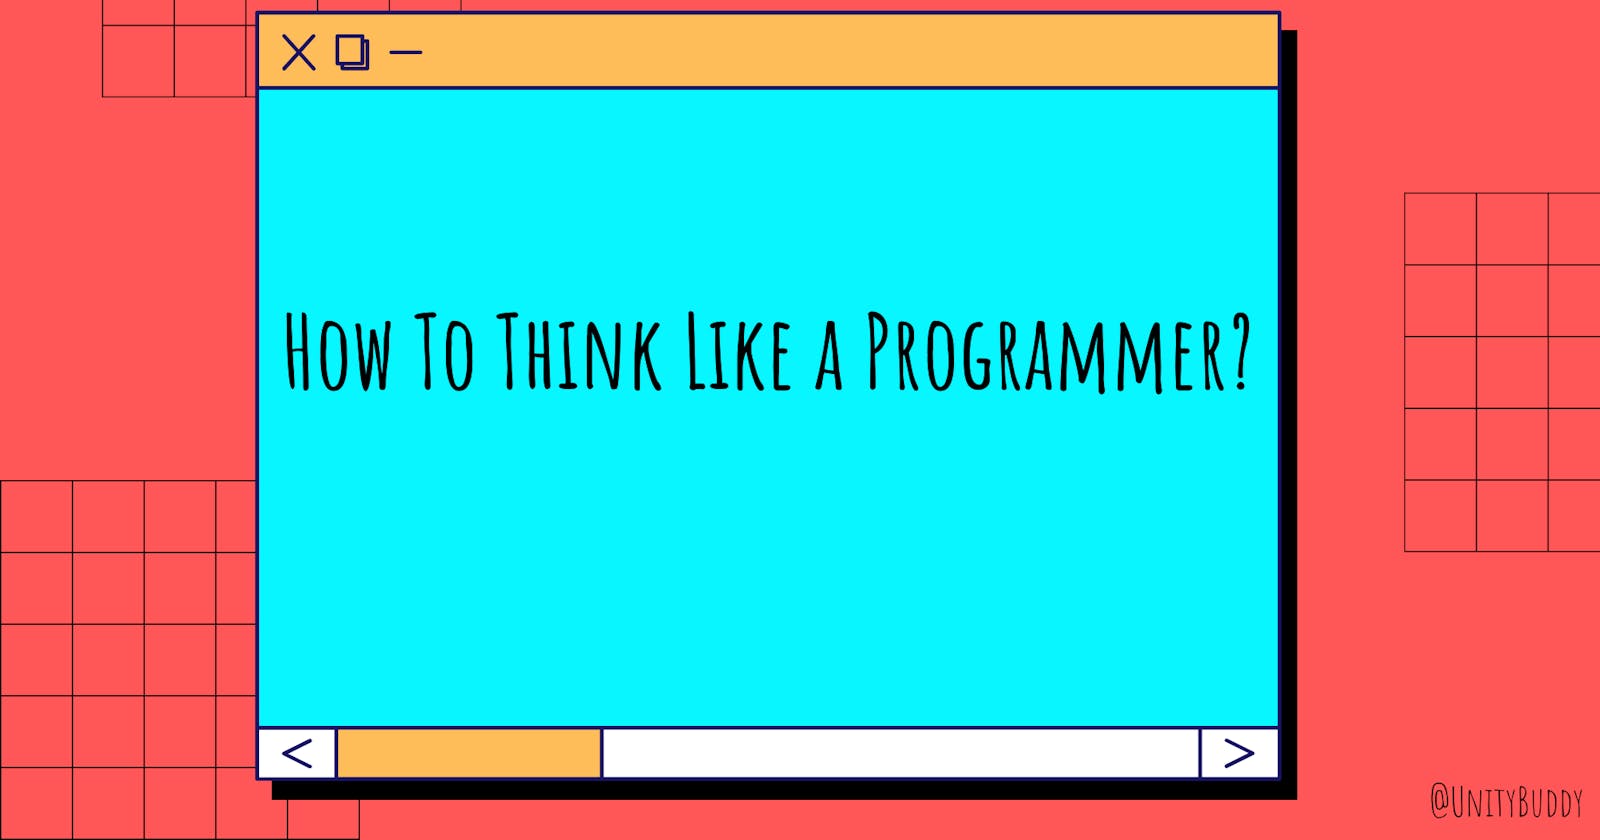 How To Think Like a Programmer?